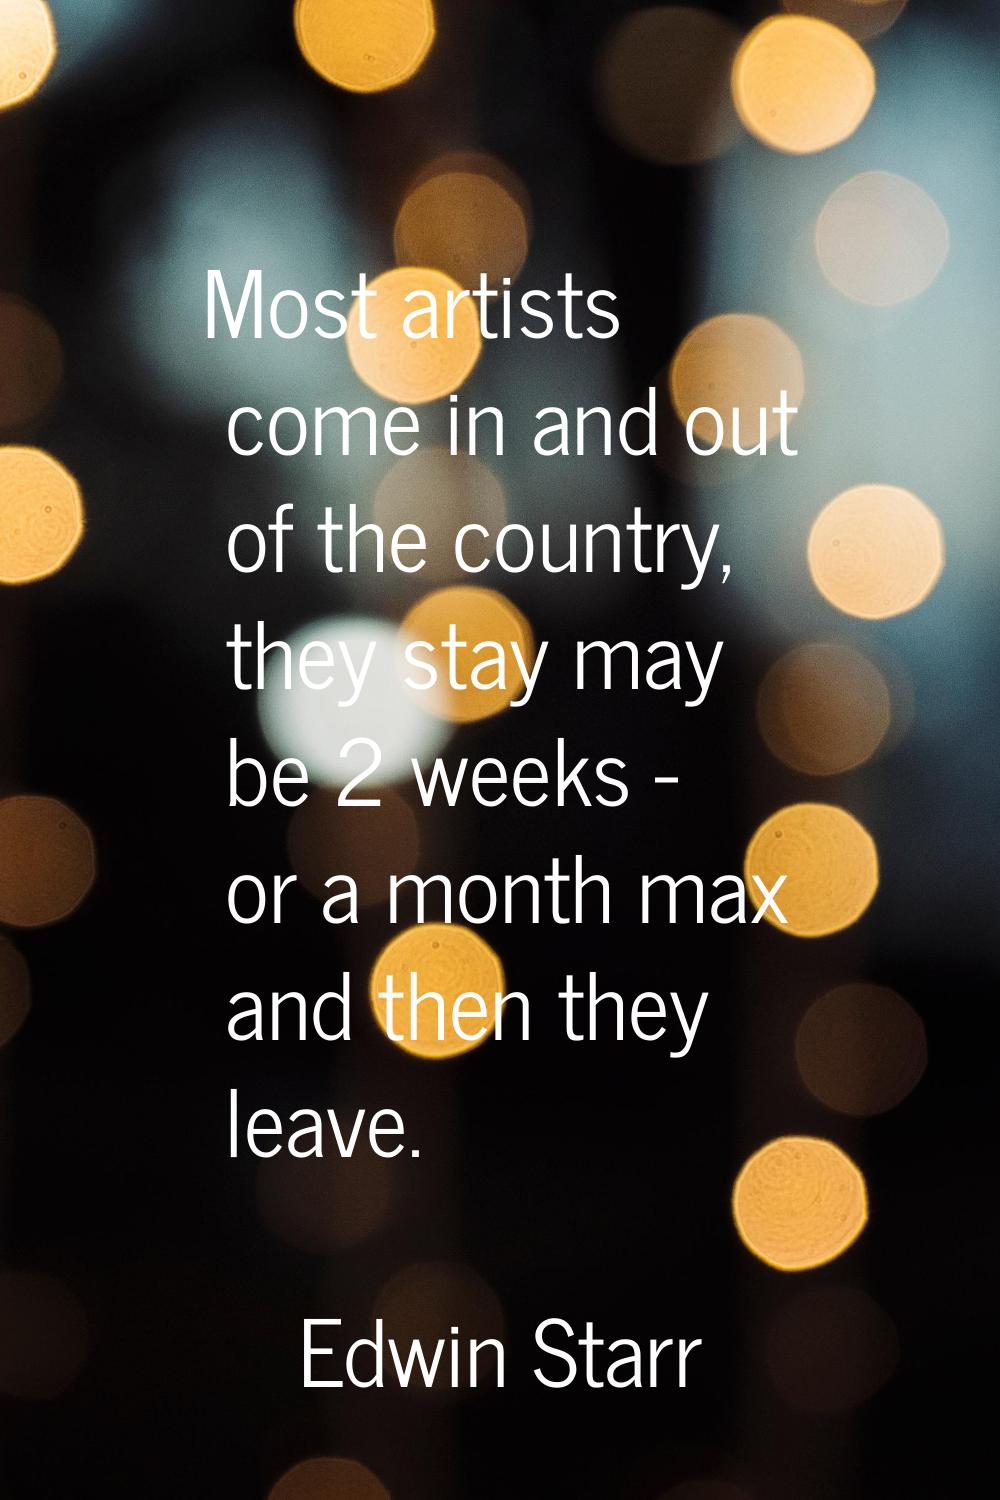 Most artists come in and out of the country, they stay may be 2 weeks - or a month max and then the